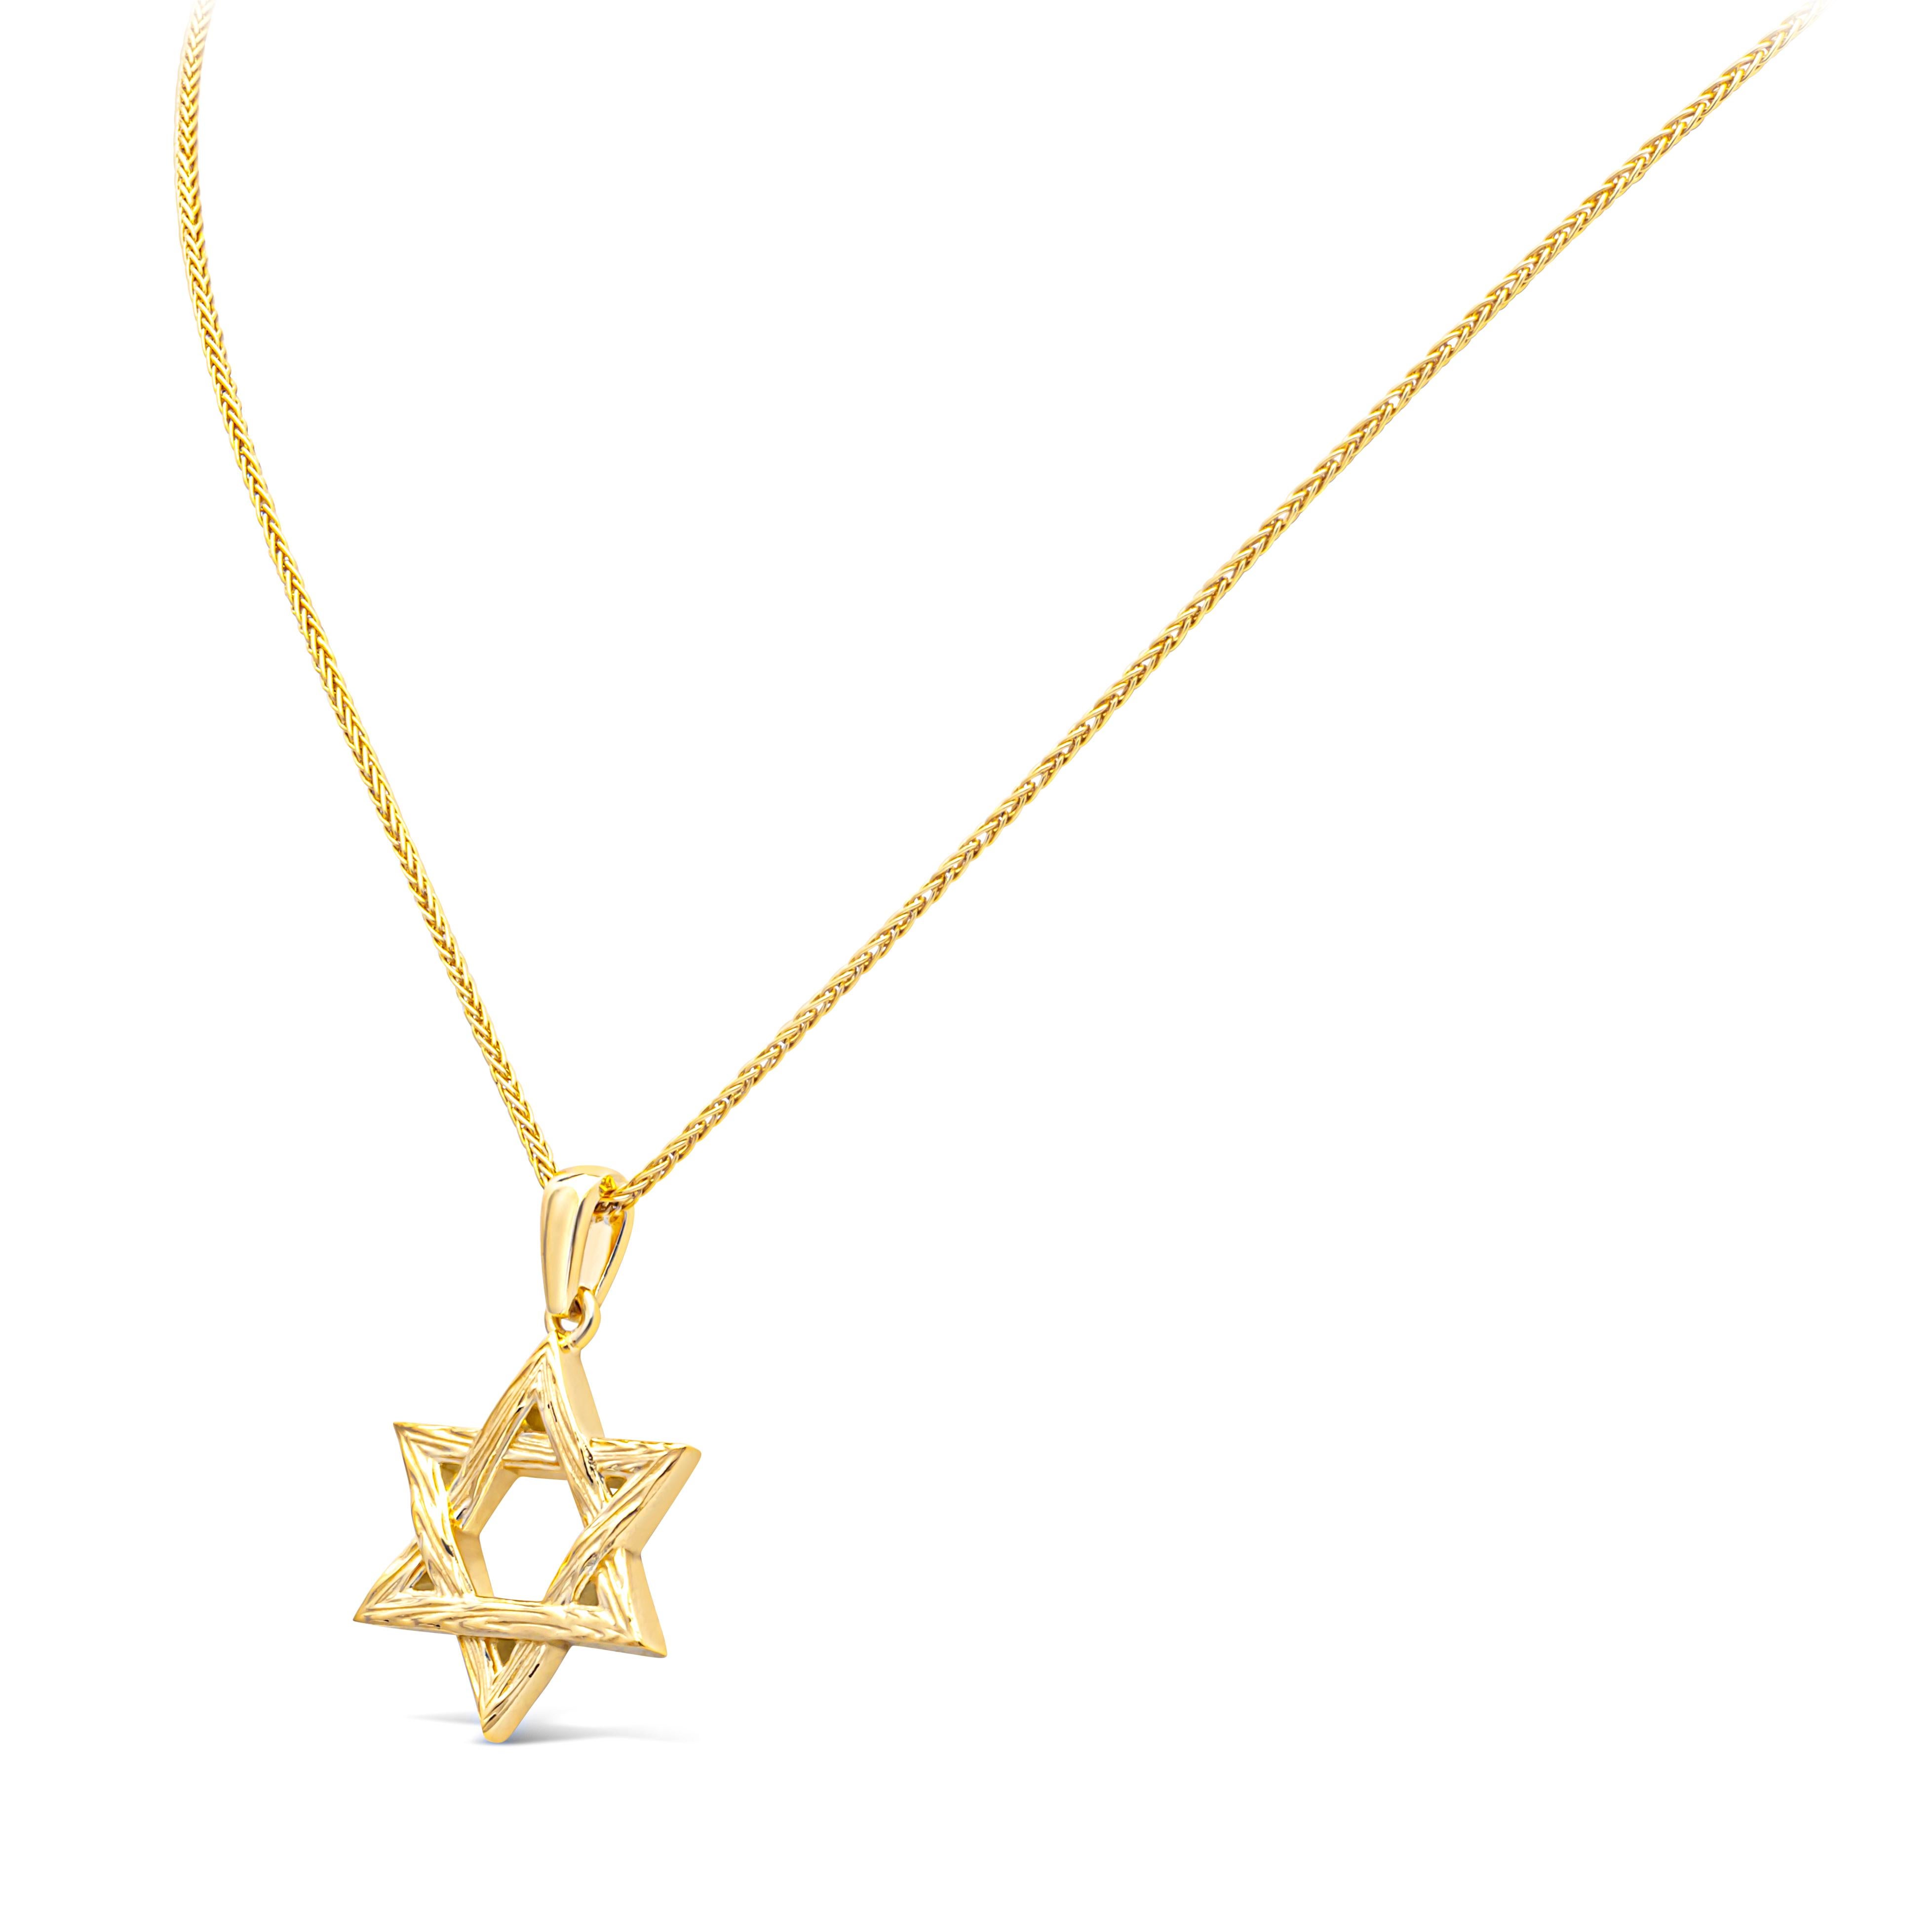 Contemporary Roman Malakov 18K Yellow Gold Star of David Pendant Necklace with Wheat Chain For Sale